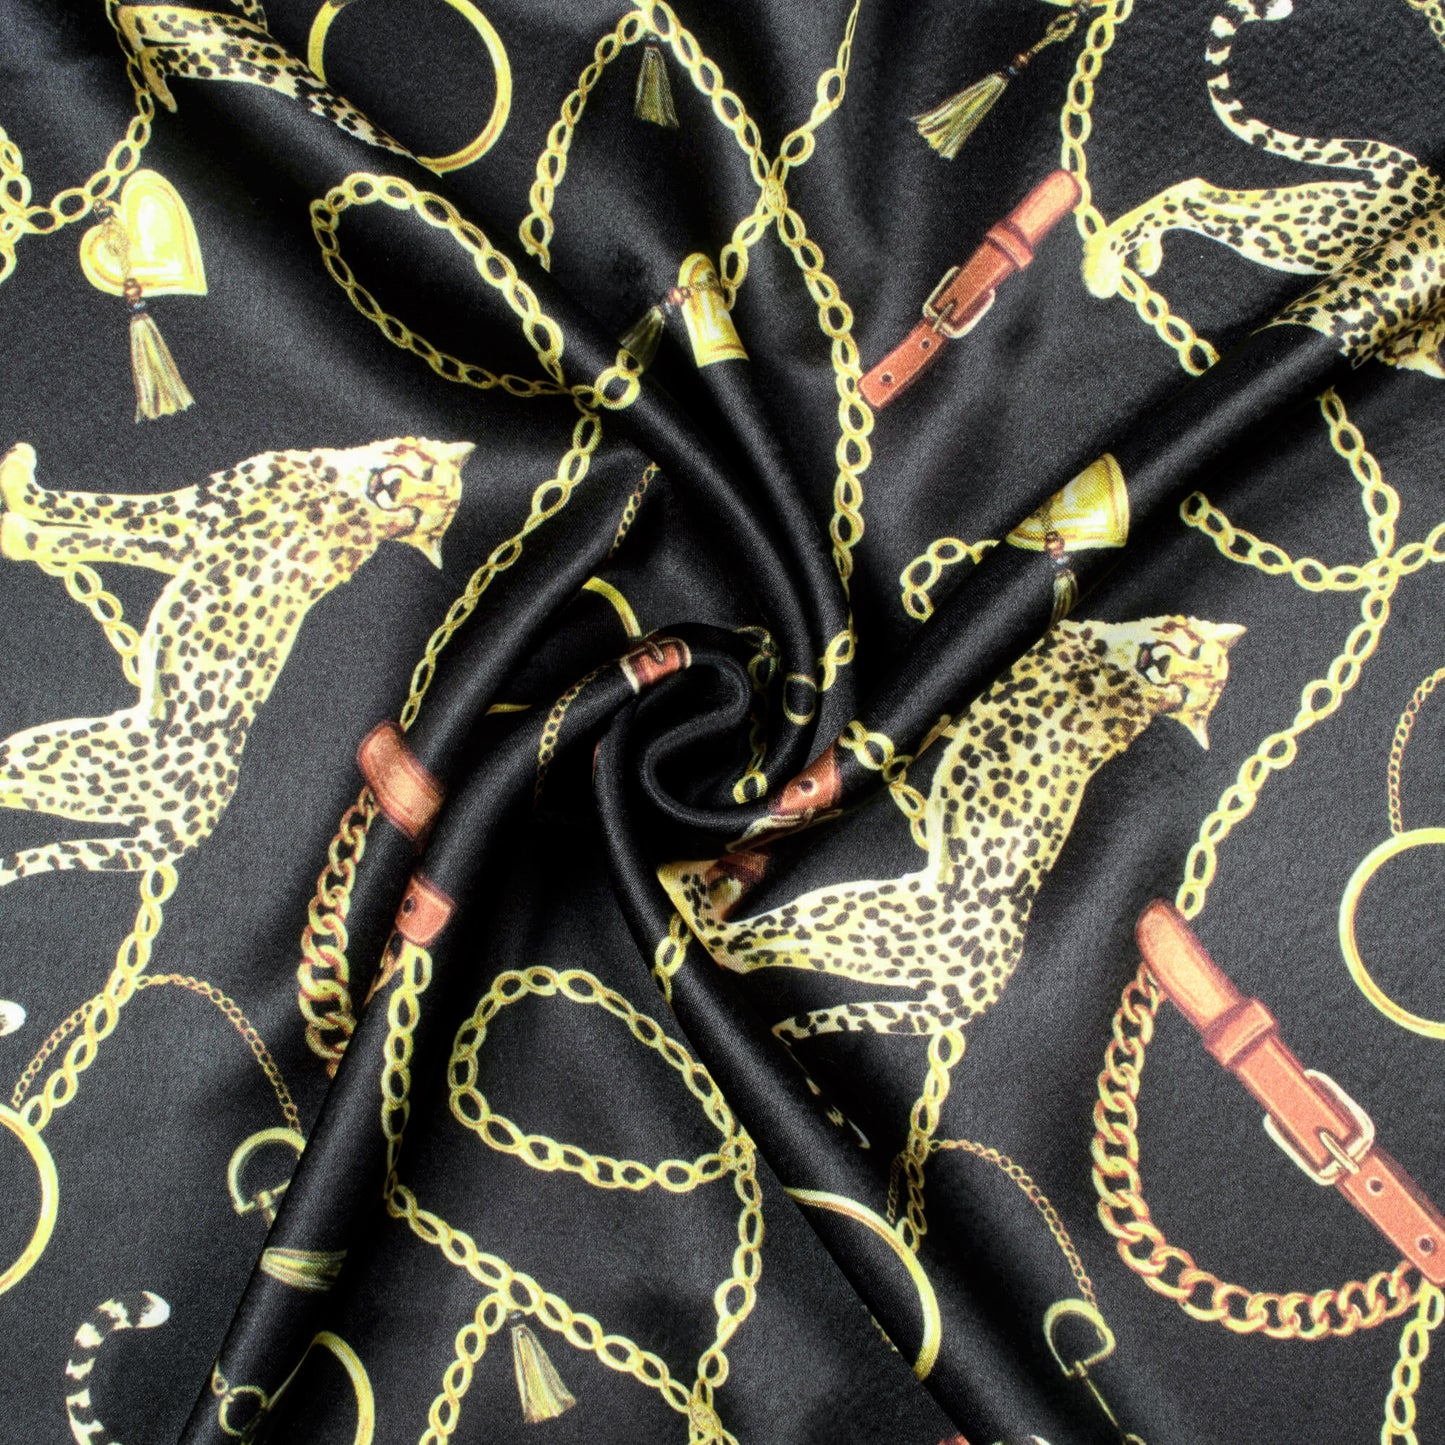 Black And Tiger Yellow Chain Pattern Digital Print Japan Satin Fabric - Fabcurate